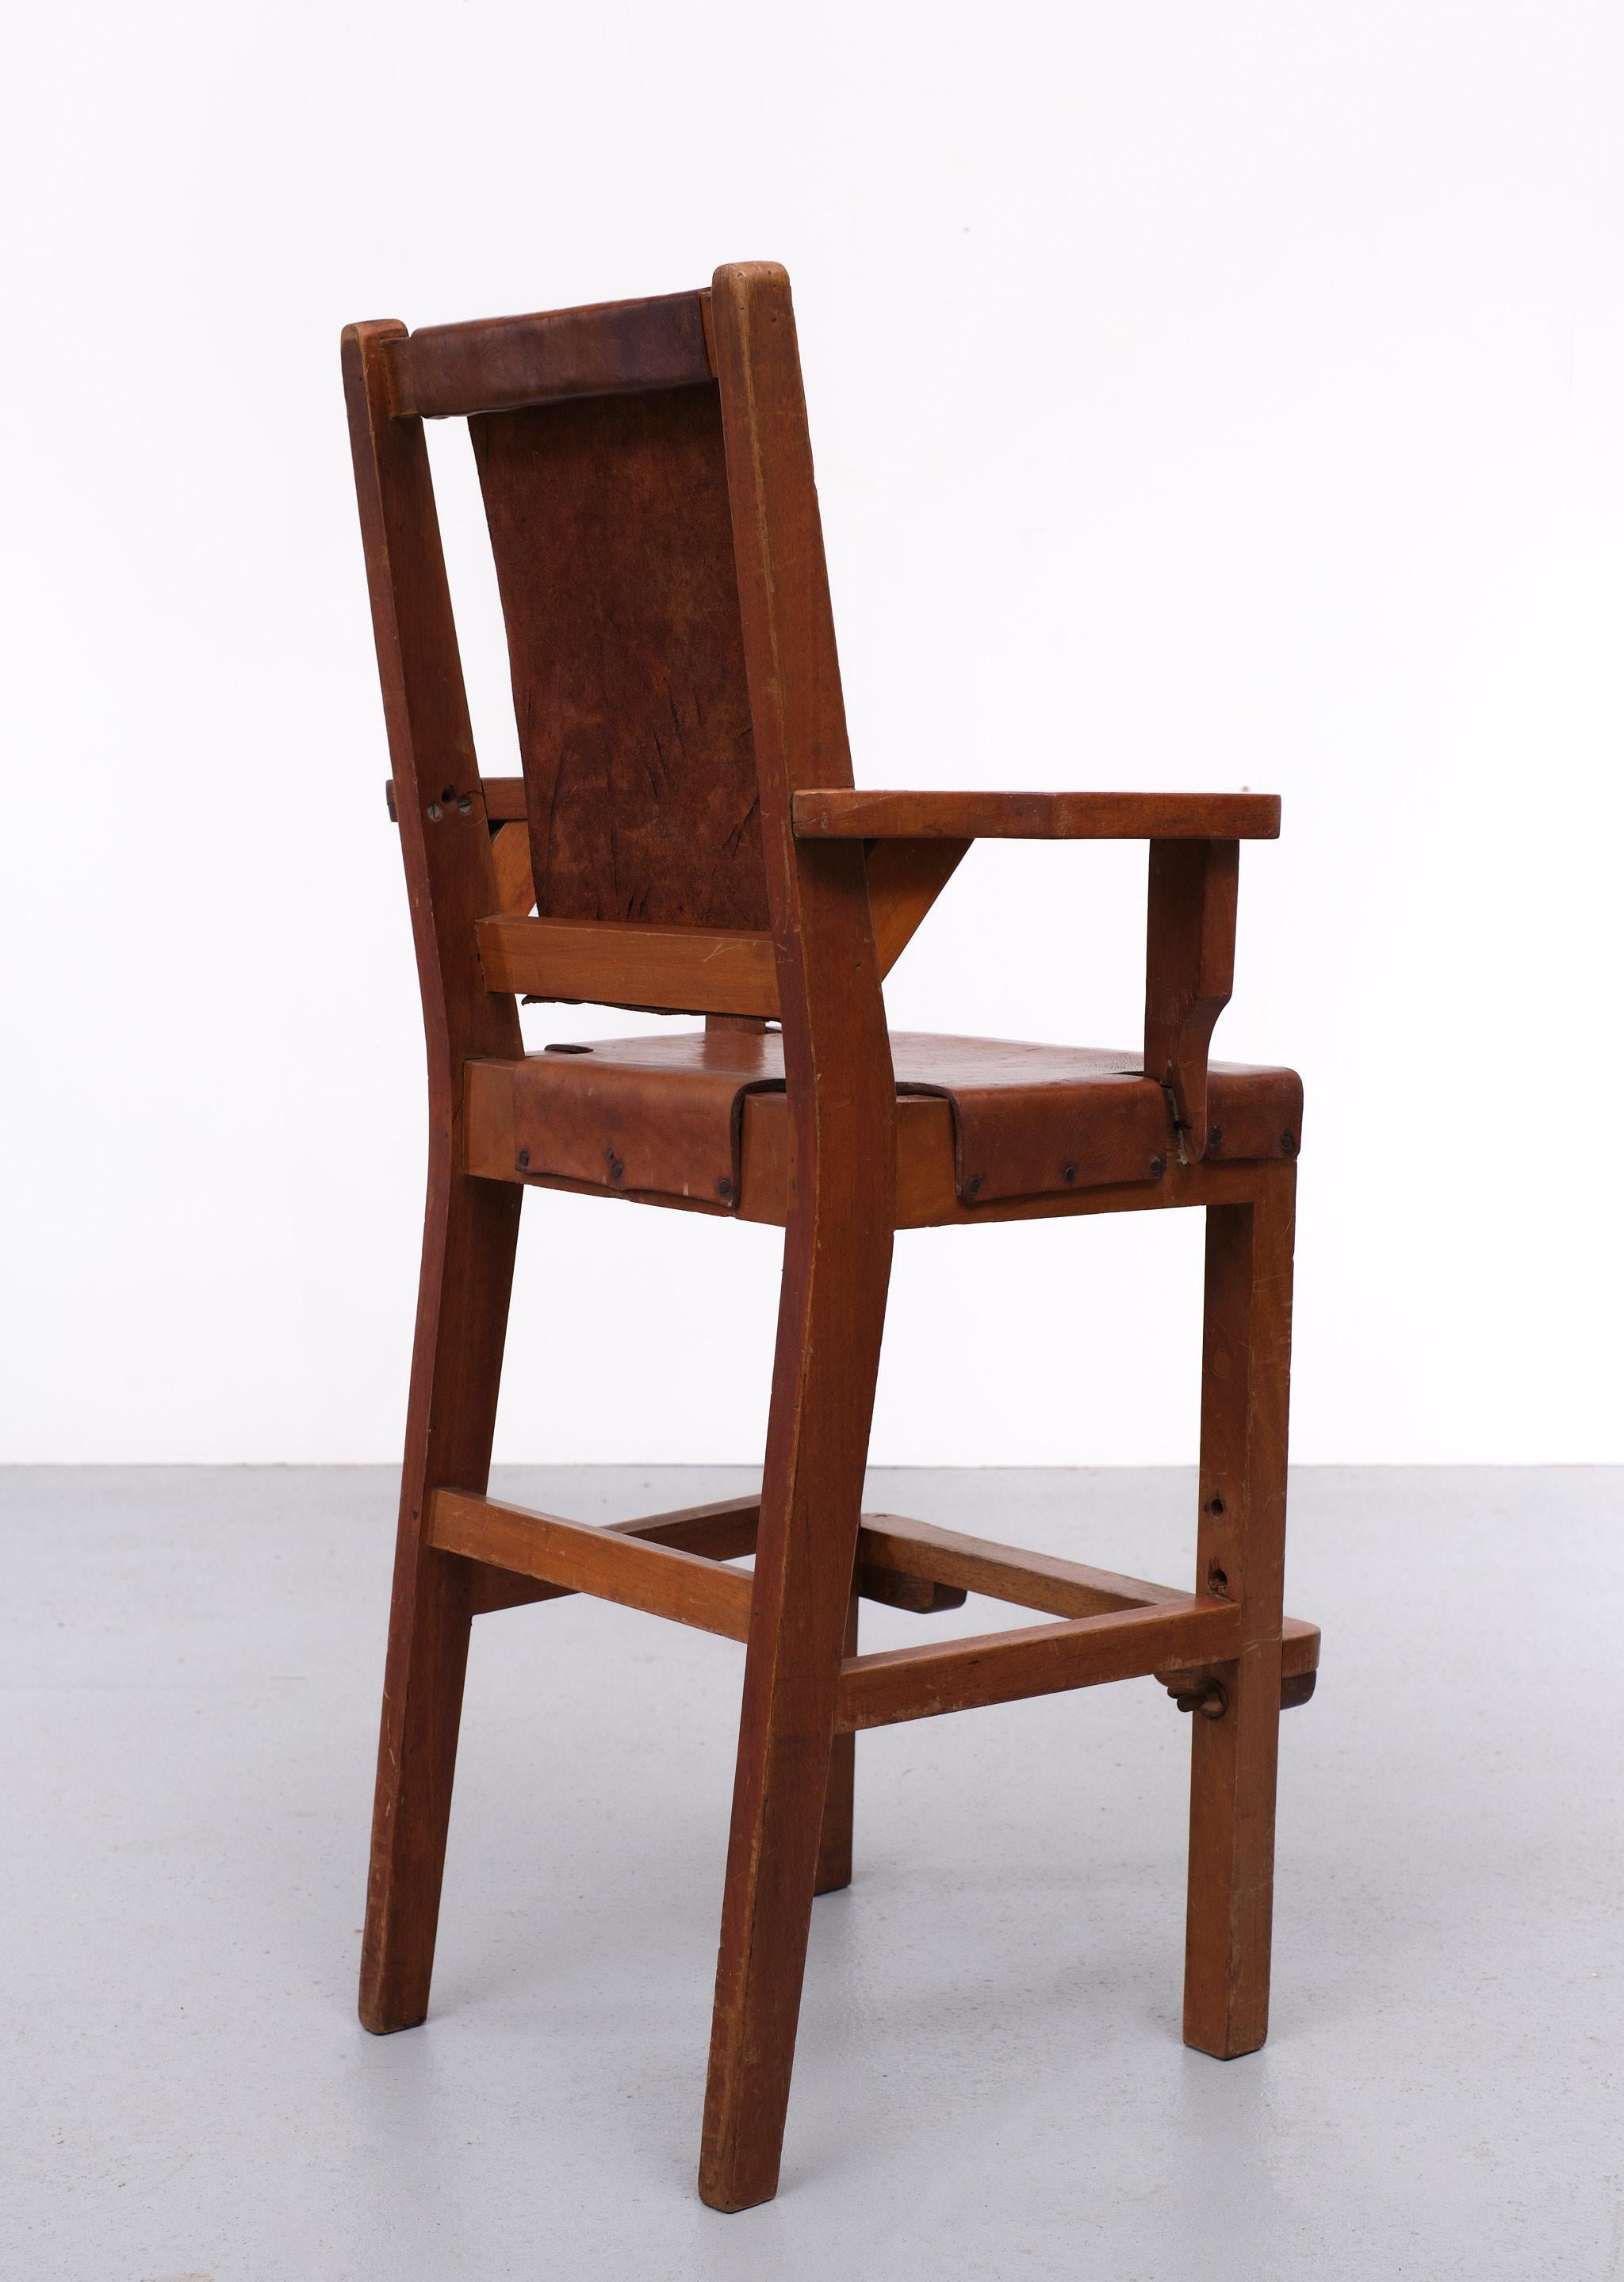 Wood Modernist High Chair Gerrit Rietveld Style 1940s Dutch For Sale